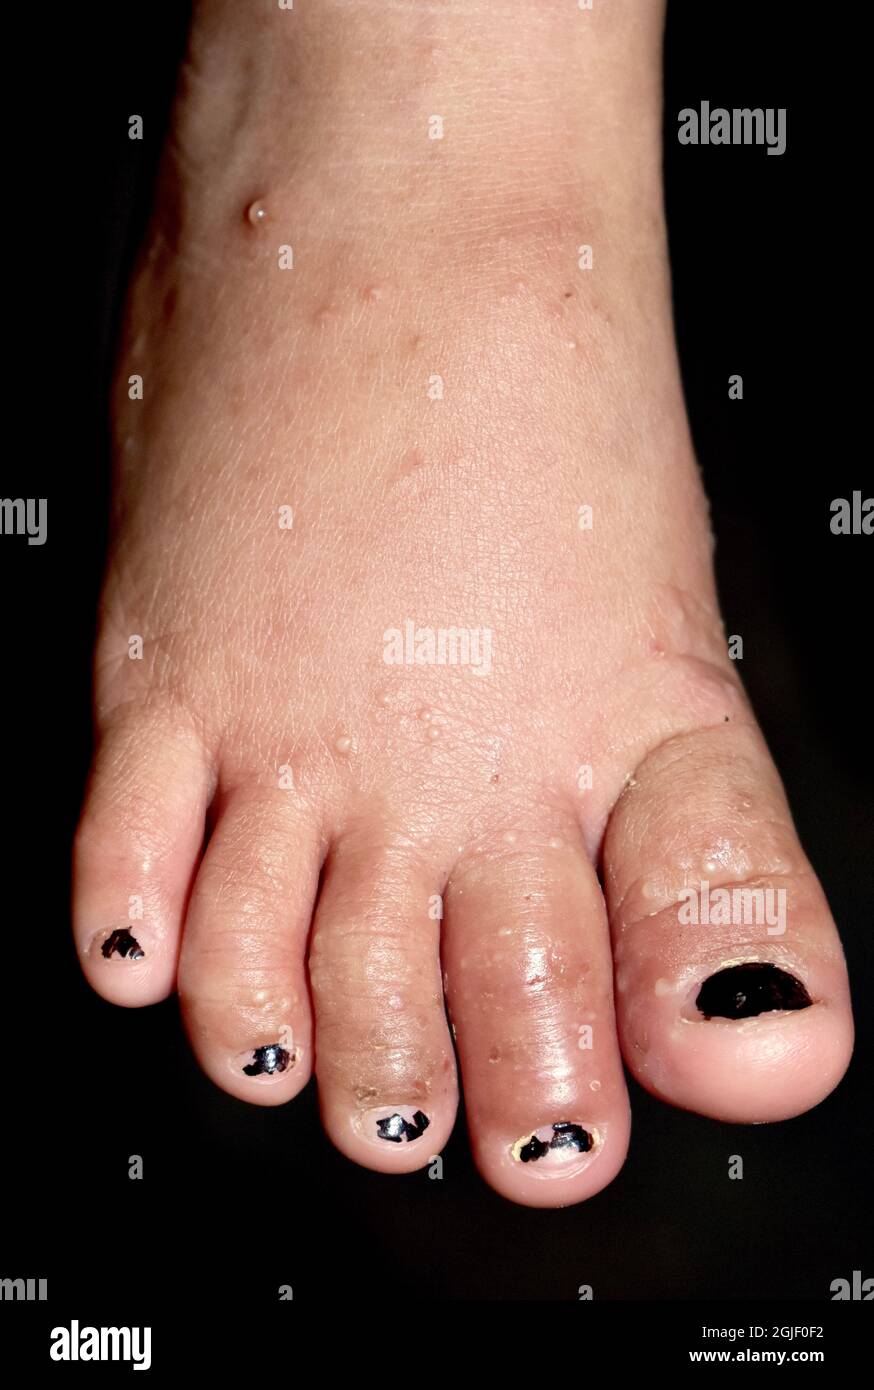 Scabies Infestation with blisters in foot of Southeast Asian, Burmese child. A contagious skin condition caused by mites. Isolated on black. Stock Photo